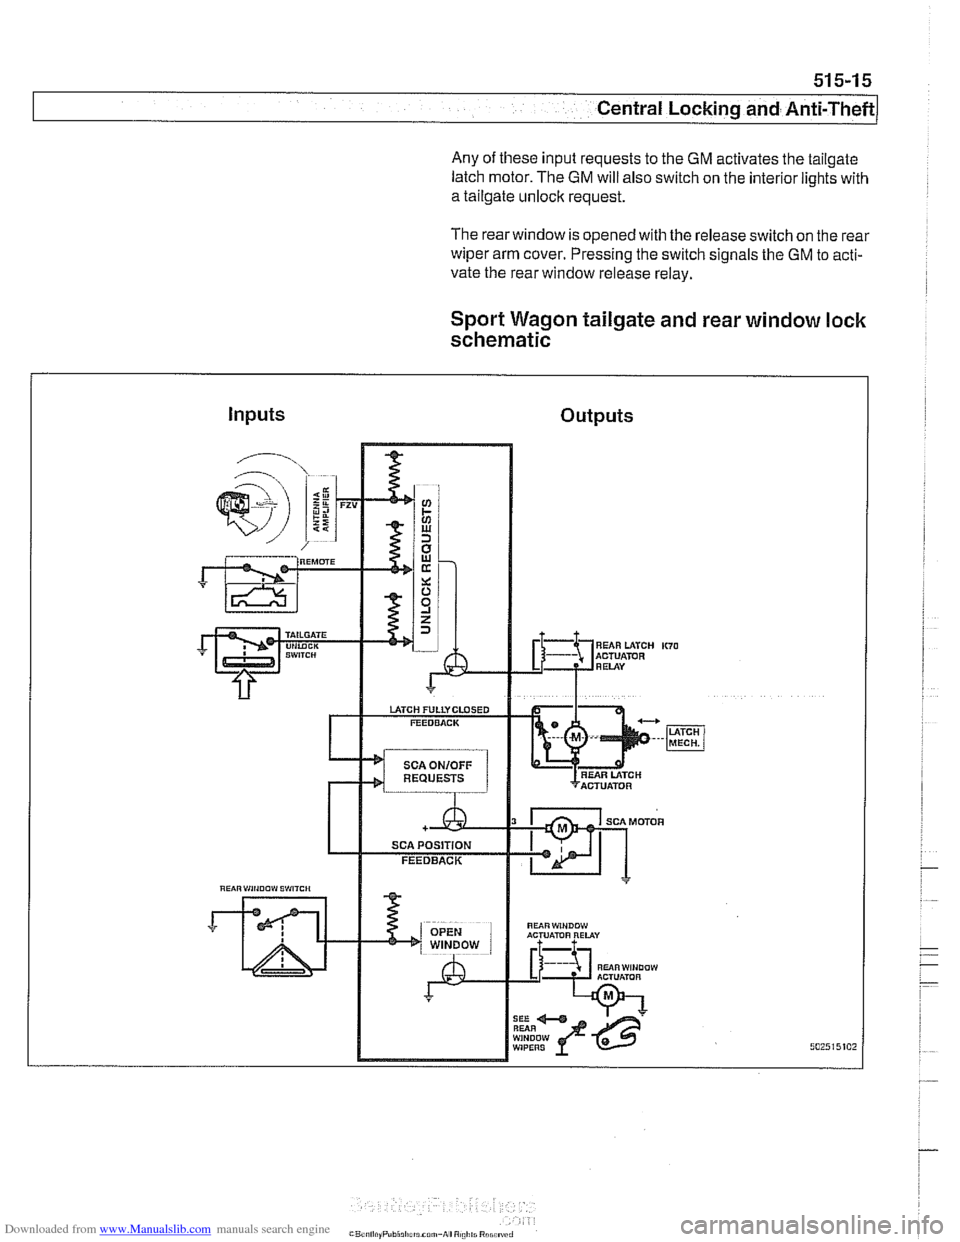 BMW 540i 2000 E39 Workshop Manual Downloaded from www.Manualslib.com manuals search engine 
51 5-1 5 
Central Locking and Anti-Theft 
Any  of these input requests to  the GM activates  the tailgate 
latch motor.  The 
GM will also swi